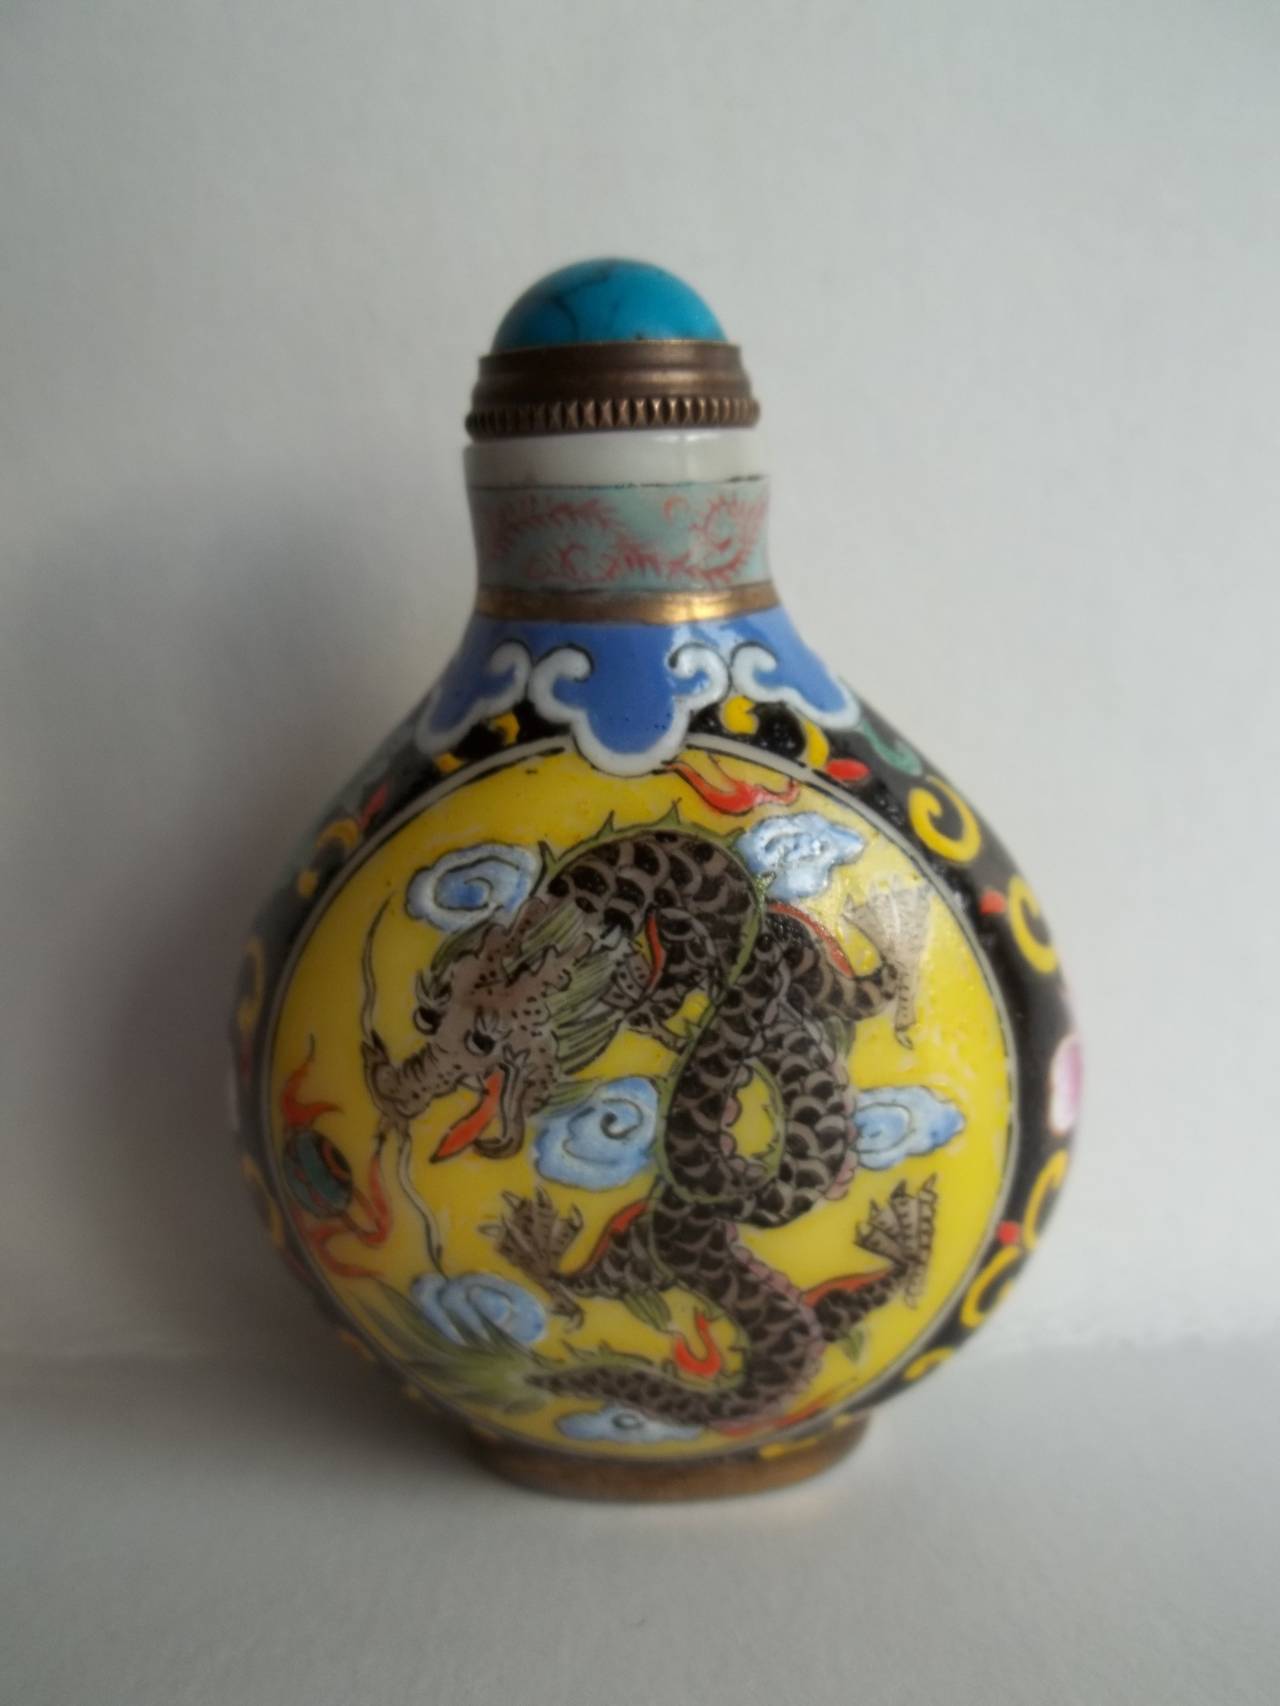 This is a very good example of a Chinese Snuff Bottle, made from opaque white glass with hand enamelled decoration.

The main decoration to one side is of a five toed (clawed) dragon chasing a flaming pearl on a yellow ground. To the reverse are a